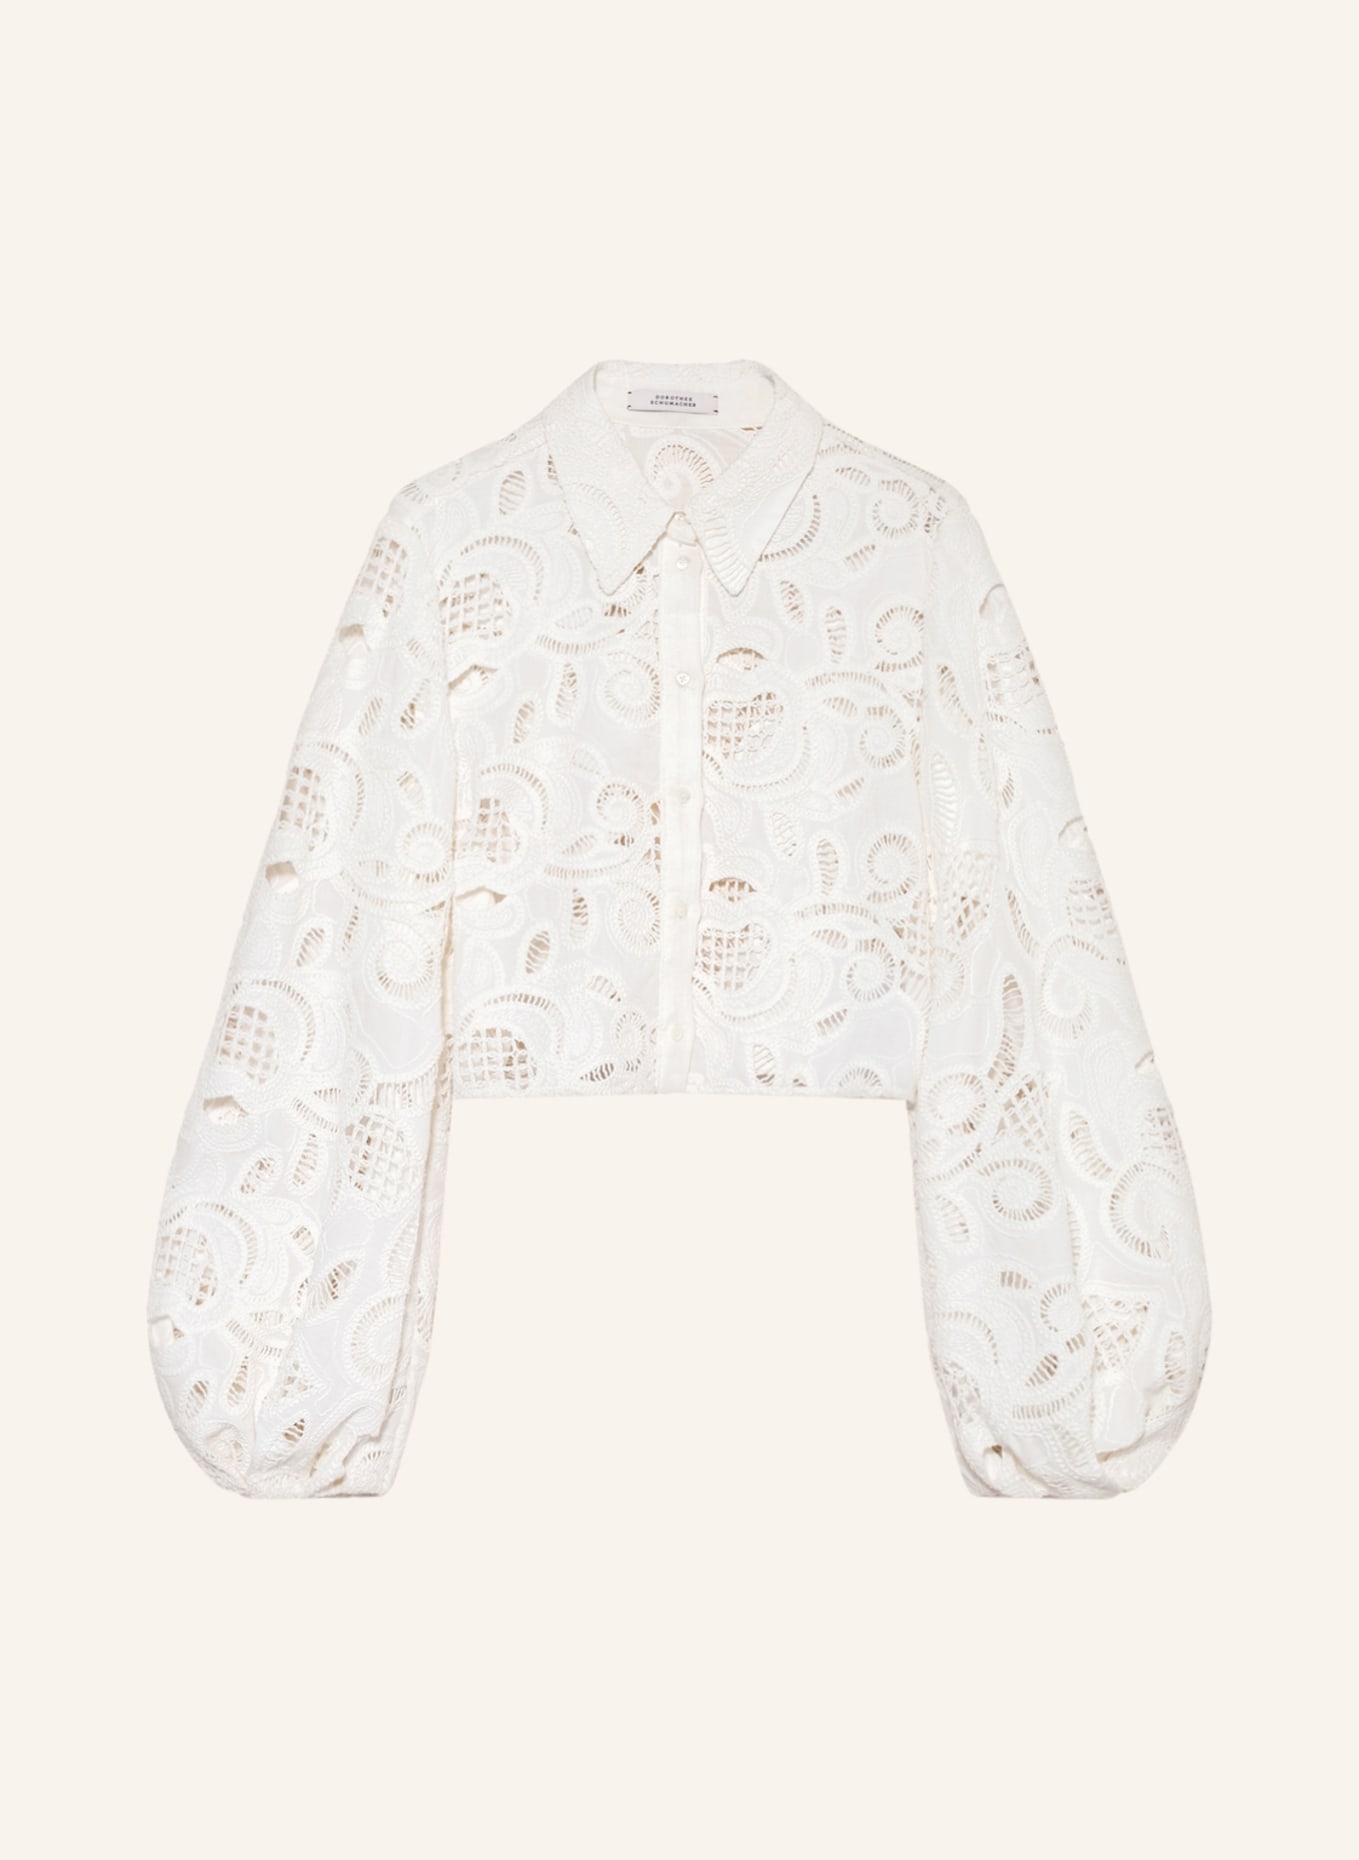 DOROTHEE SCHUMACHER Cropped shirt blouse in crochet lace, Color: WHITE (Image 1)